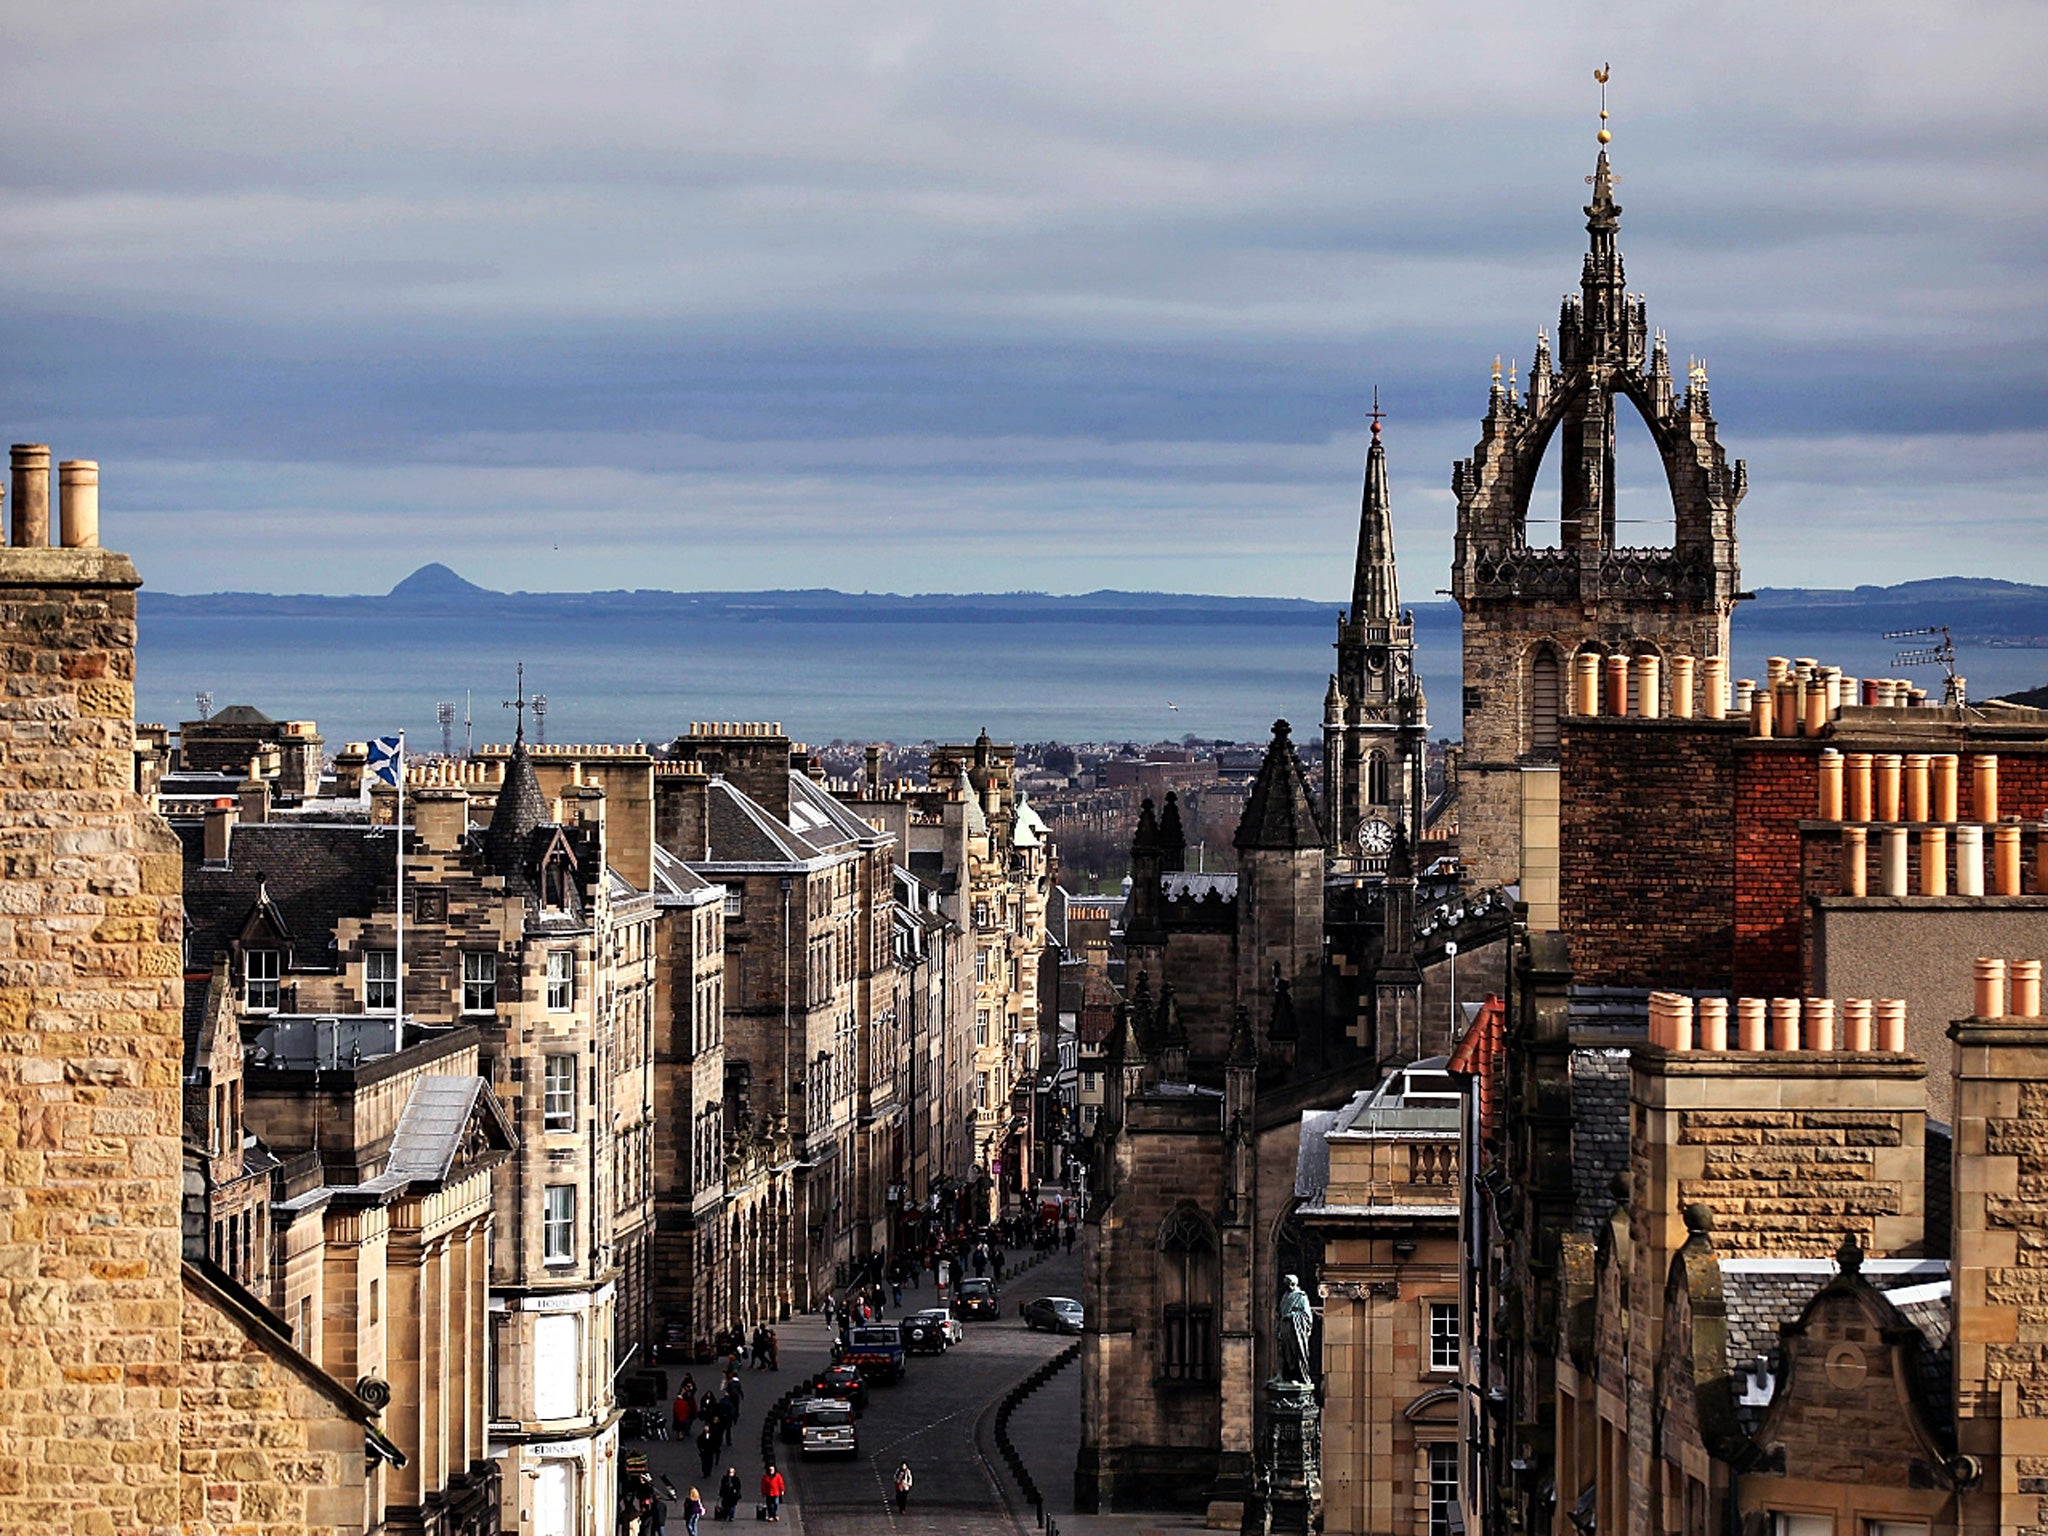 High point: the Royal Mile in Edinburgh's Old Town